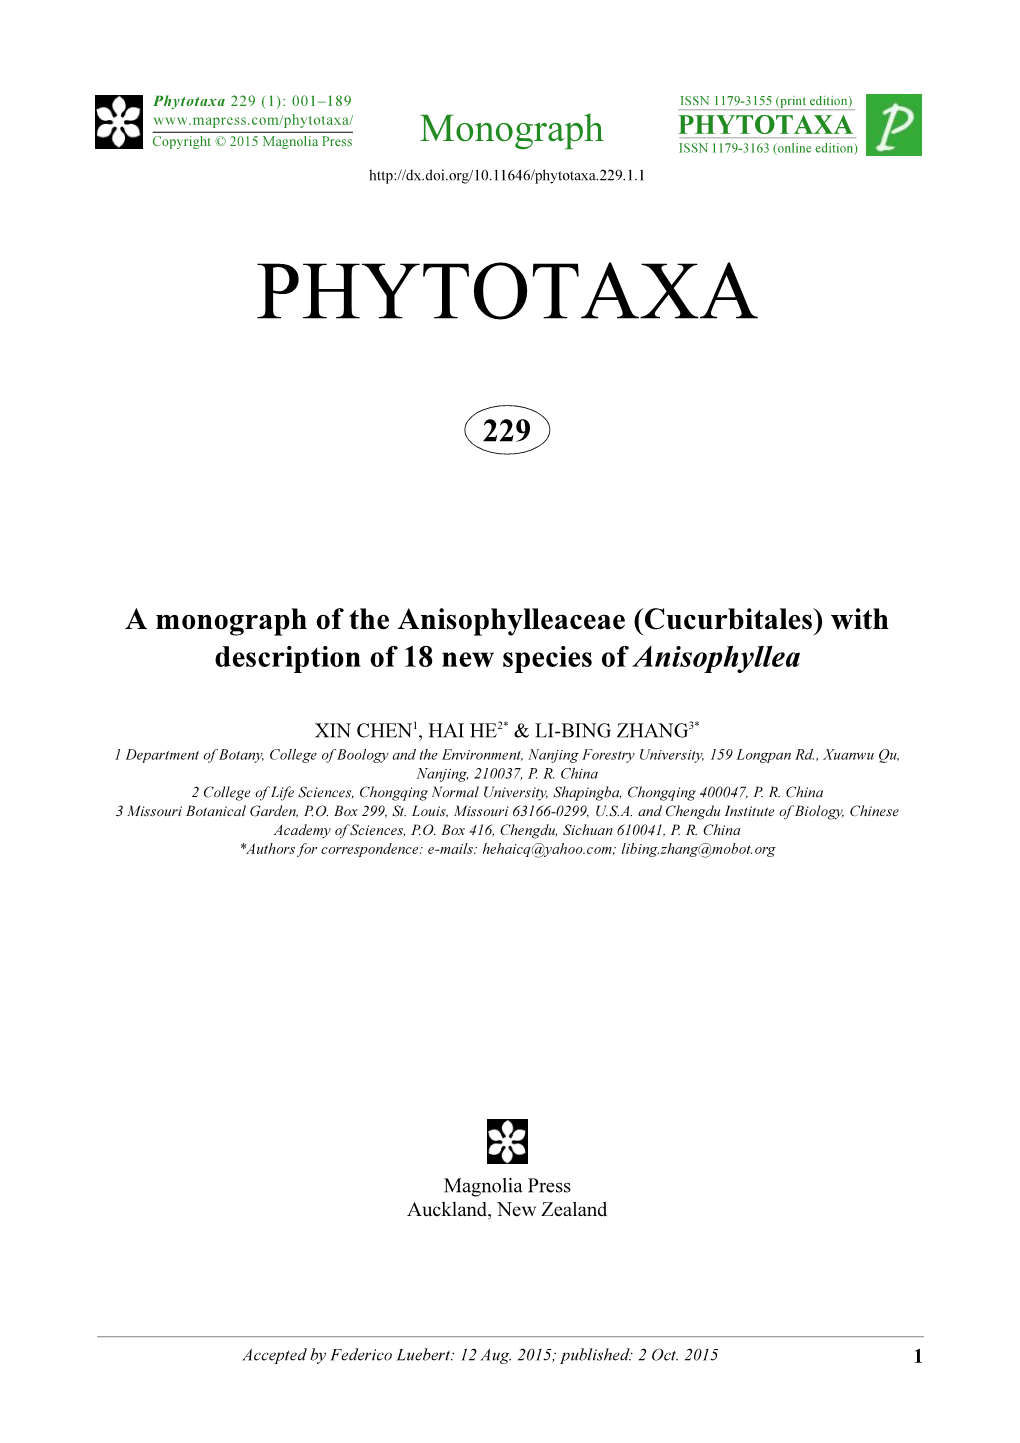 A Monograph of the Anisophylleaceae (Cucurbitales) with Description of 18 New Species of Anisophyllea